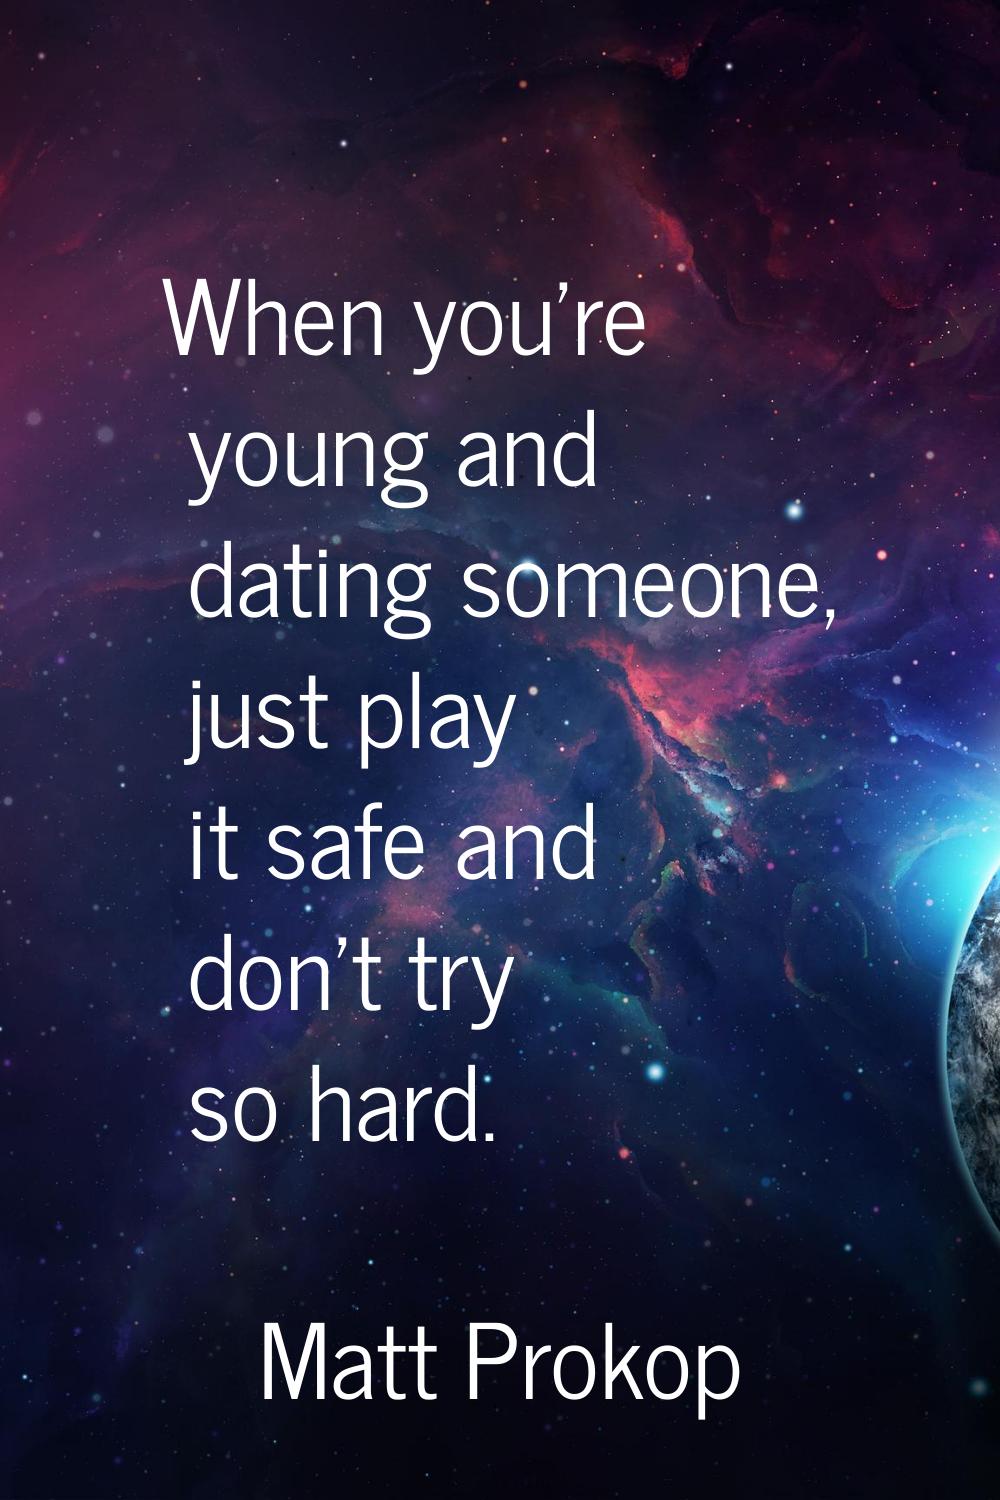 When you're young and dating someone, just play it safe and don't try so hard.